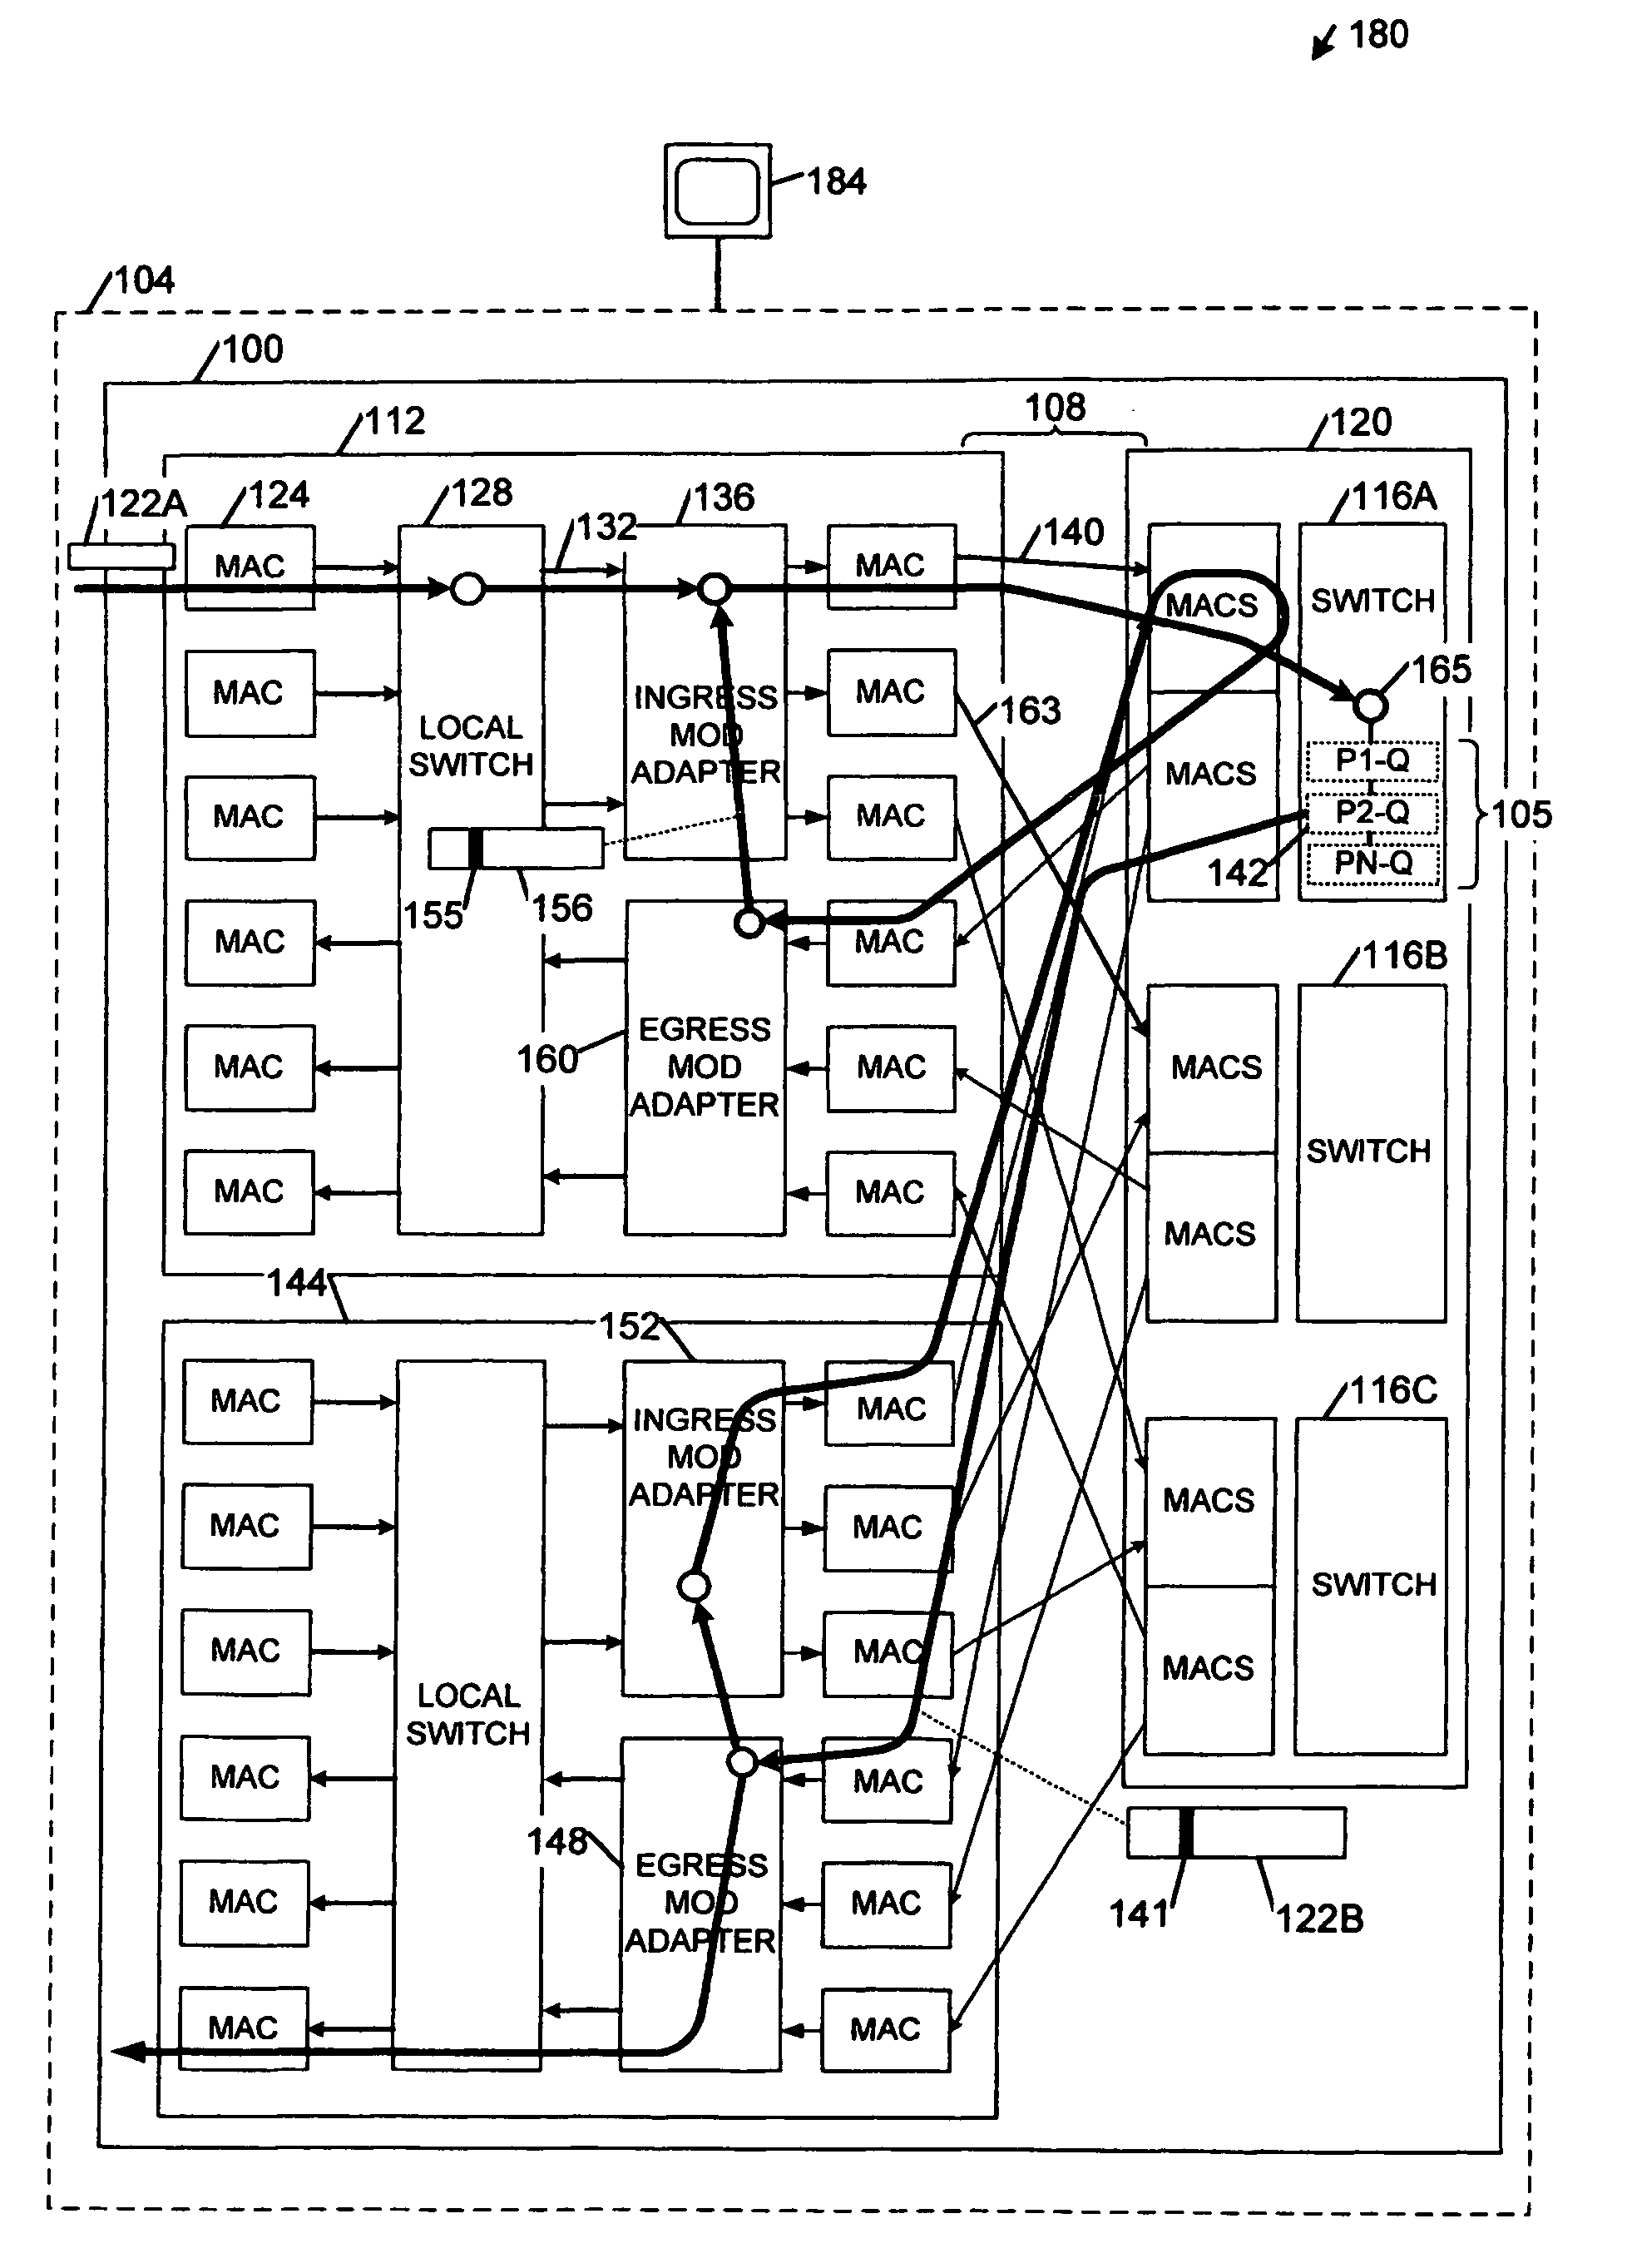 Network load balancing apparatus, systems, and methods